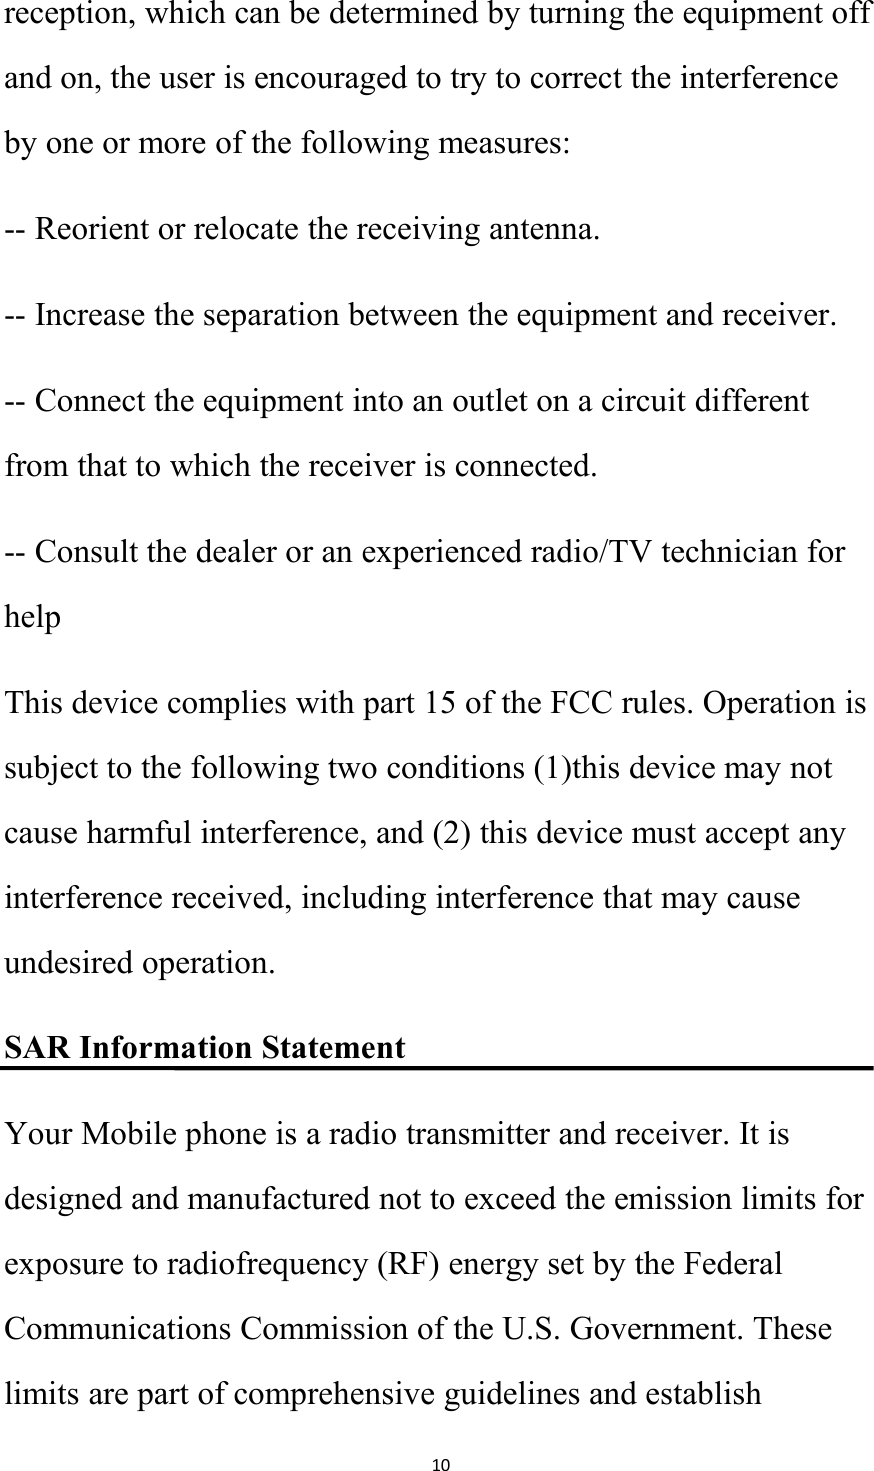 10reception, which can be determined by turning the equipment offand on, the user is encouraged to try to correct the interferenceby one or more of the following measures:-- Reorient or relocate the receiving antenna.-- Increase the separation between the equipment and receiver.-- Connect the equipment into an outlet on a circuit differentfrom that to which the receiver is connected.-- Consult the dealer or an experienced radio/TV technician forhelpThis device complies with part 15 of the FCC rules. Operation issubject to the following two conditions (1)this device may notcause harmful interference, and (2) this device must accept anyinterference received, including interference that may causeundesired operation.SAR Information StatementYour Mobile phone is a radio transmitter and receiver. It isdesigned and manufactured not to exceed the emission limits forexposure to radiofrequency (RF) energy set by the FederalCommunications Commission of the U.S. Government. Theselimits are part of comprehensive guidelines and establish